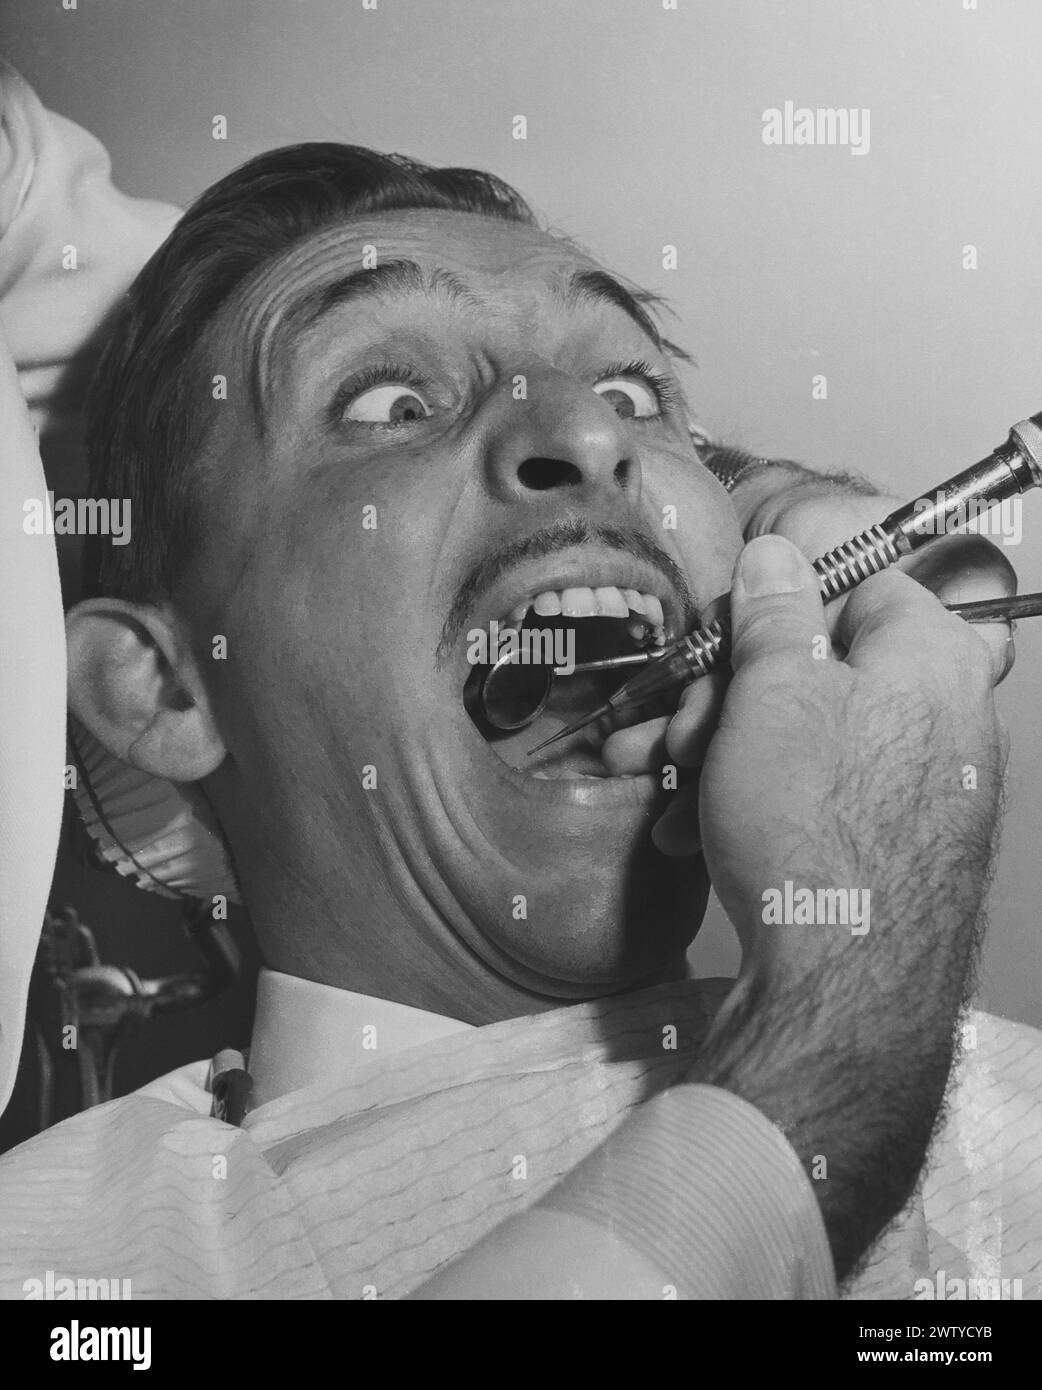 A middle-aged man appears anxious as he sits in the dentist chair undergoing a routine dental procedure Stock Photo